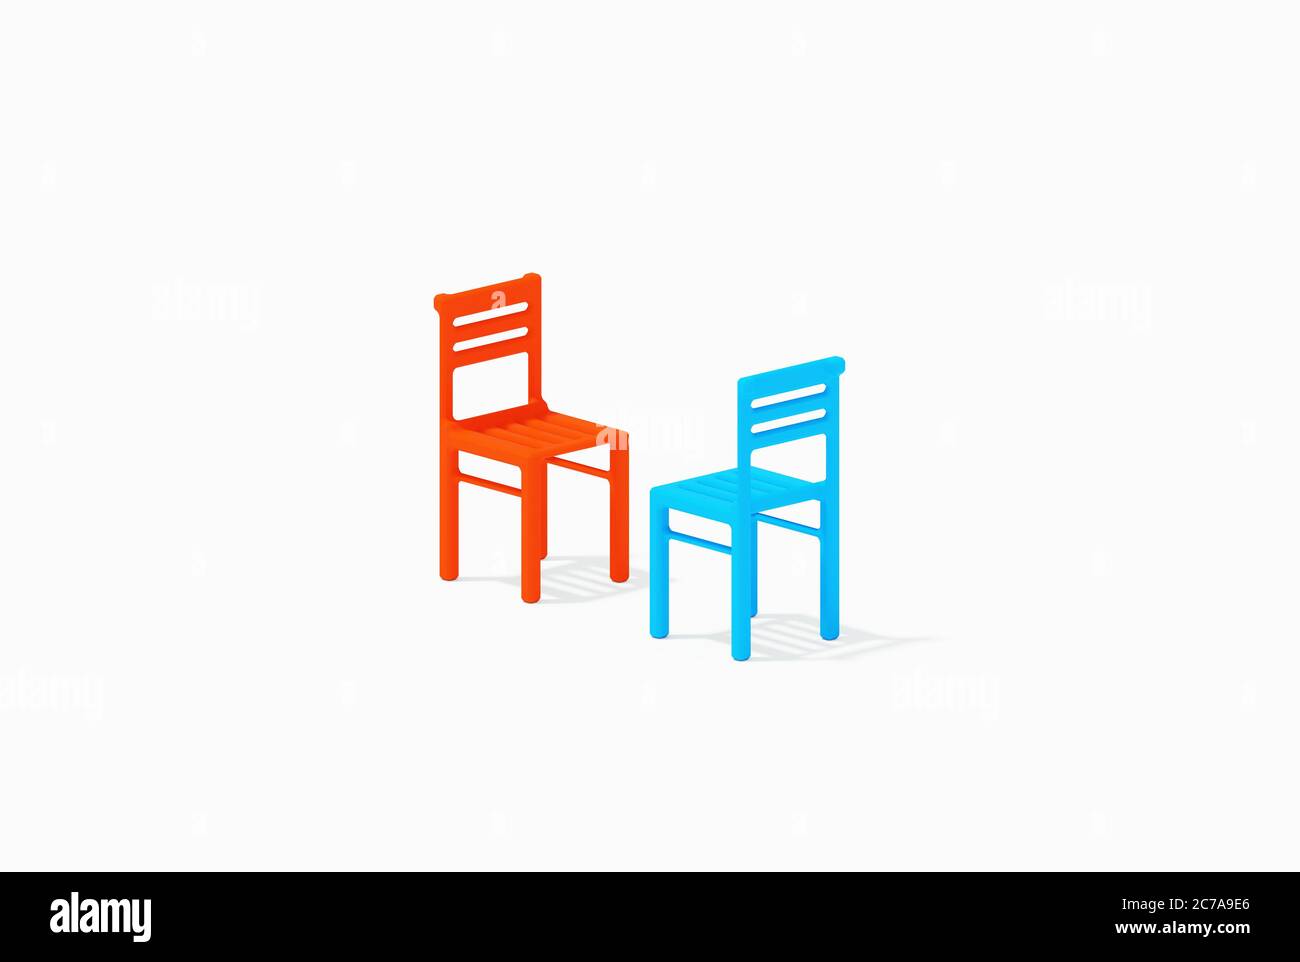 Blue and red seats staying together frontal, face to face interview concept, 3D rendered illustration of confrontation concept. Border edge dialogue Stock Photo